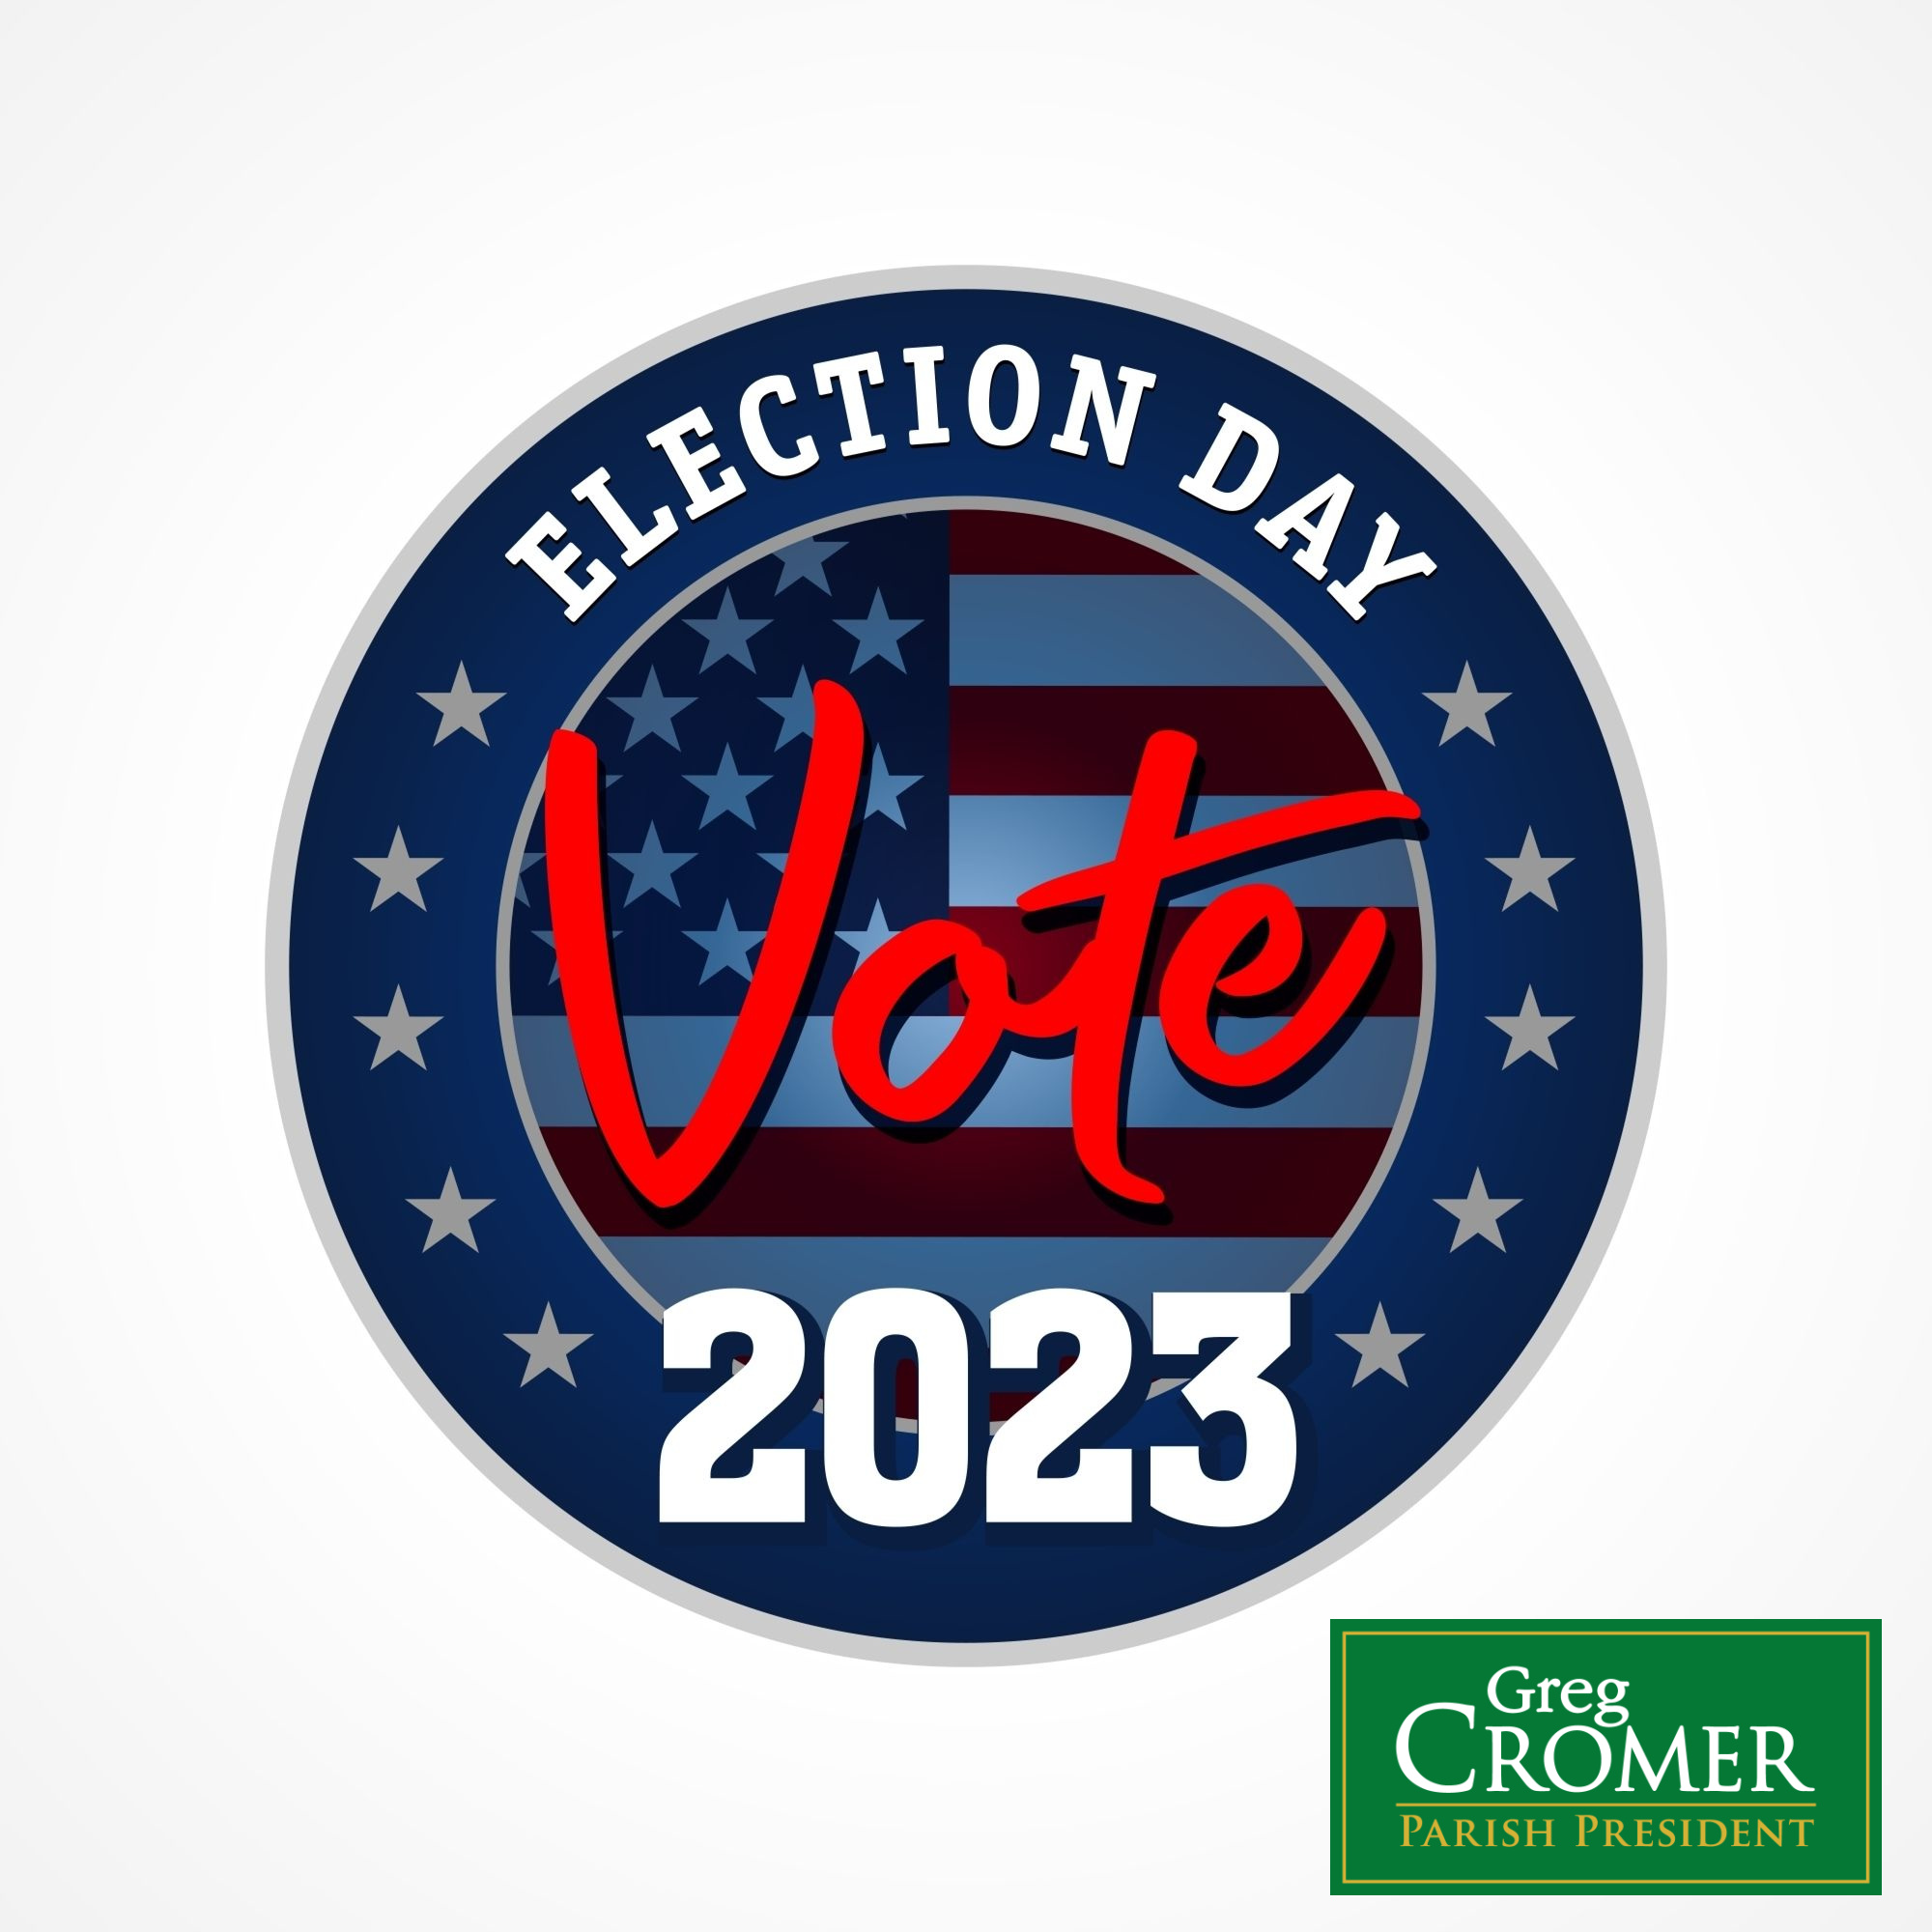 October 14, 2023, is election day!